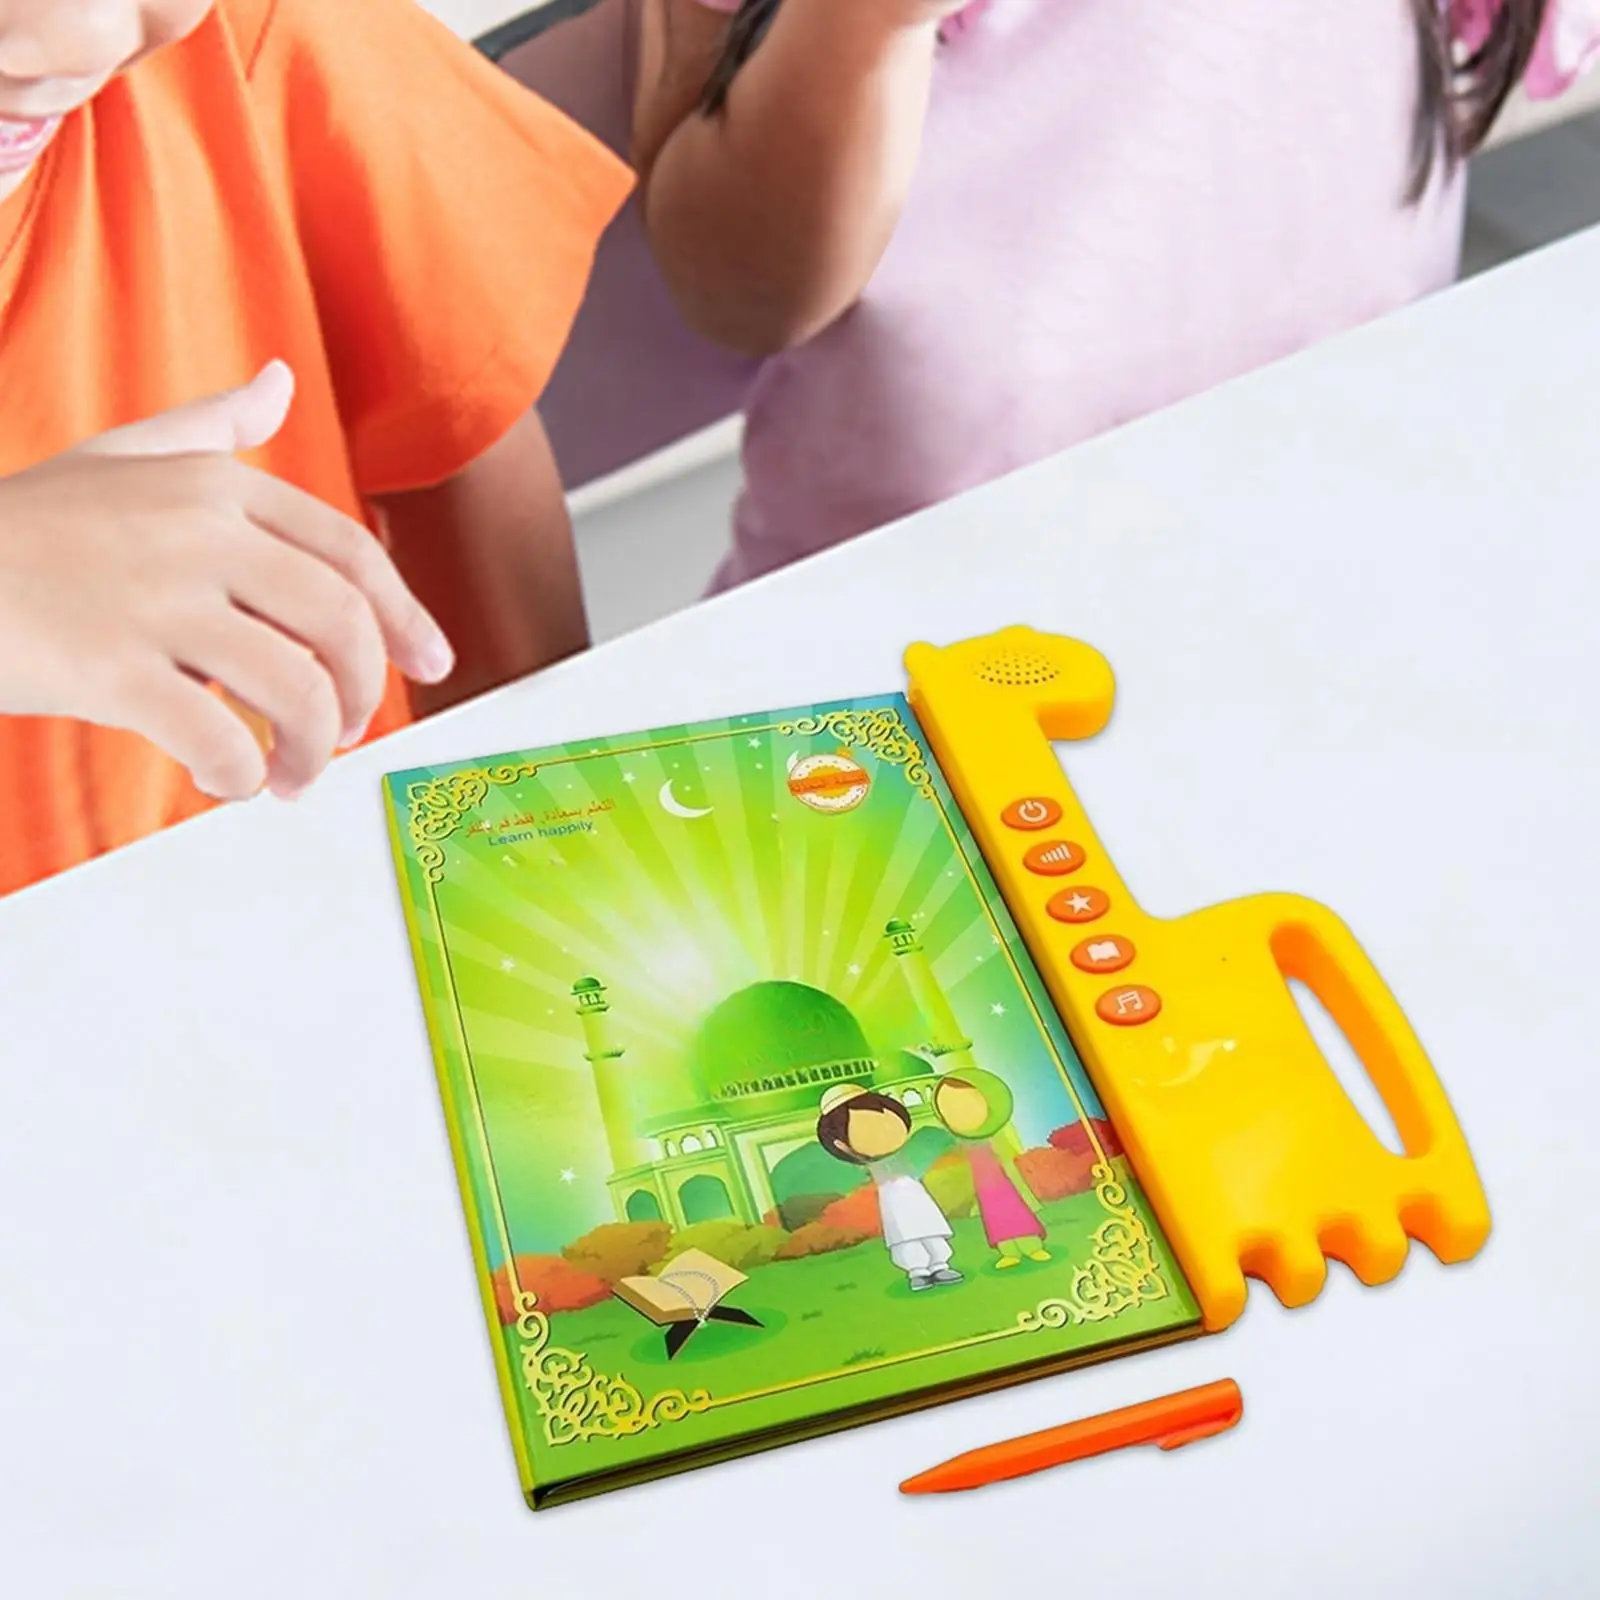 Arabic Reading Machine Arabic Word Learning Multifunction Early Educational Machine Educational Toy for Bithday Gift Girls Kids